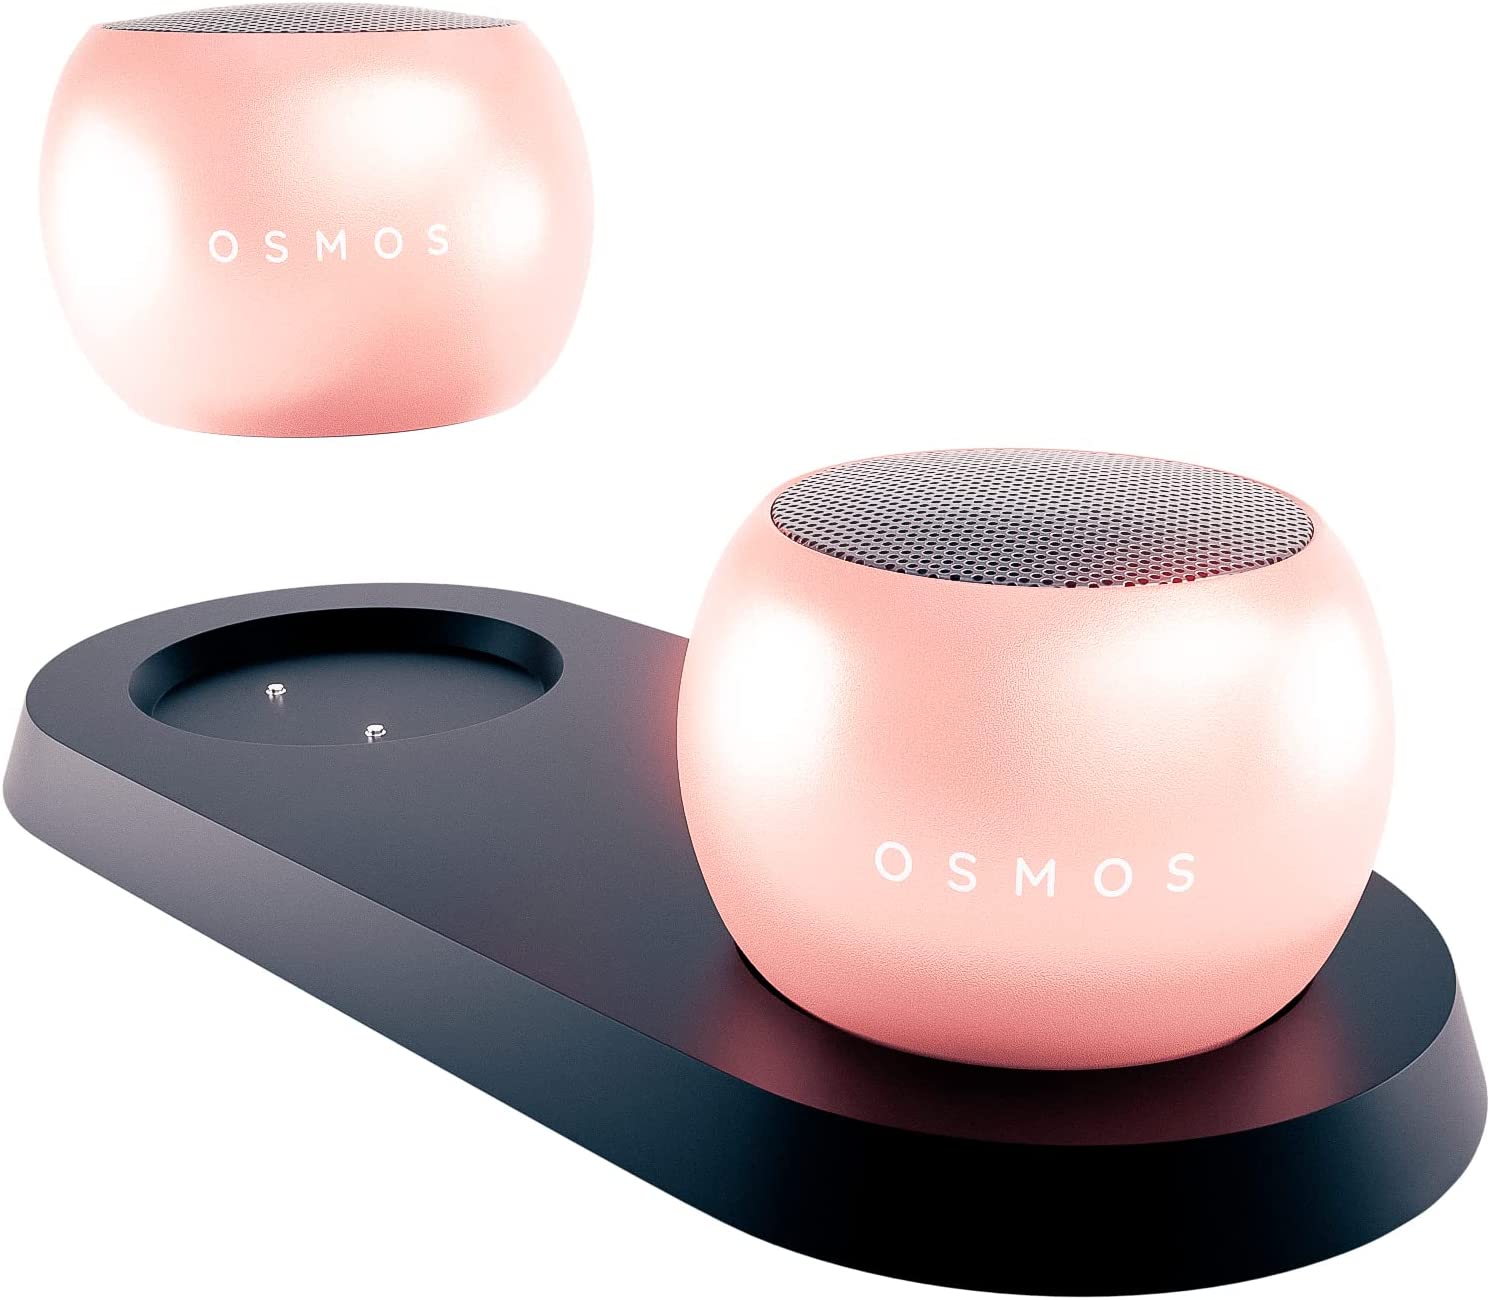 Osmos Mini Bluetooth Speaker Set-Metal, Portable, Wireless, Powerful USB Stereo Speakers + Charging Dock for Home + Outdoor-Sports Use-for Smartphone, TV, Laptop, Mac, PC, Android, iPhone (Rose Gold)